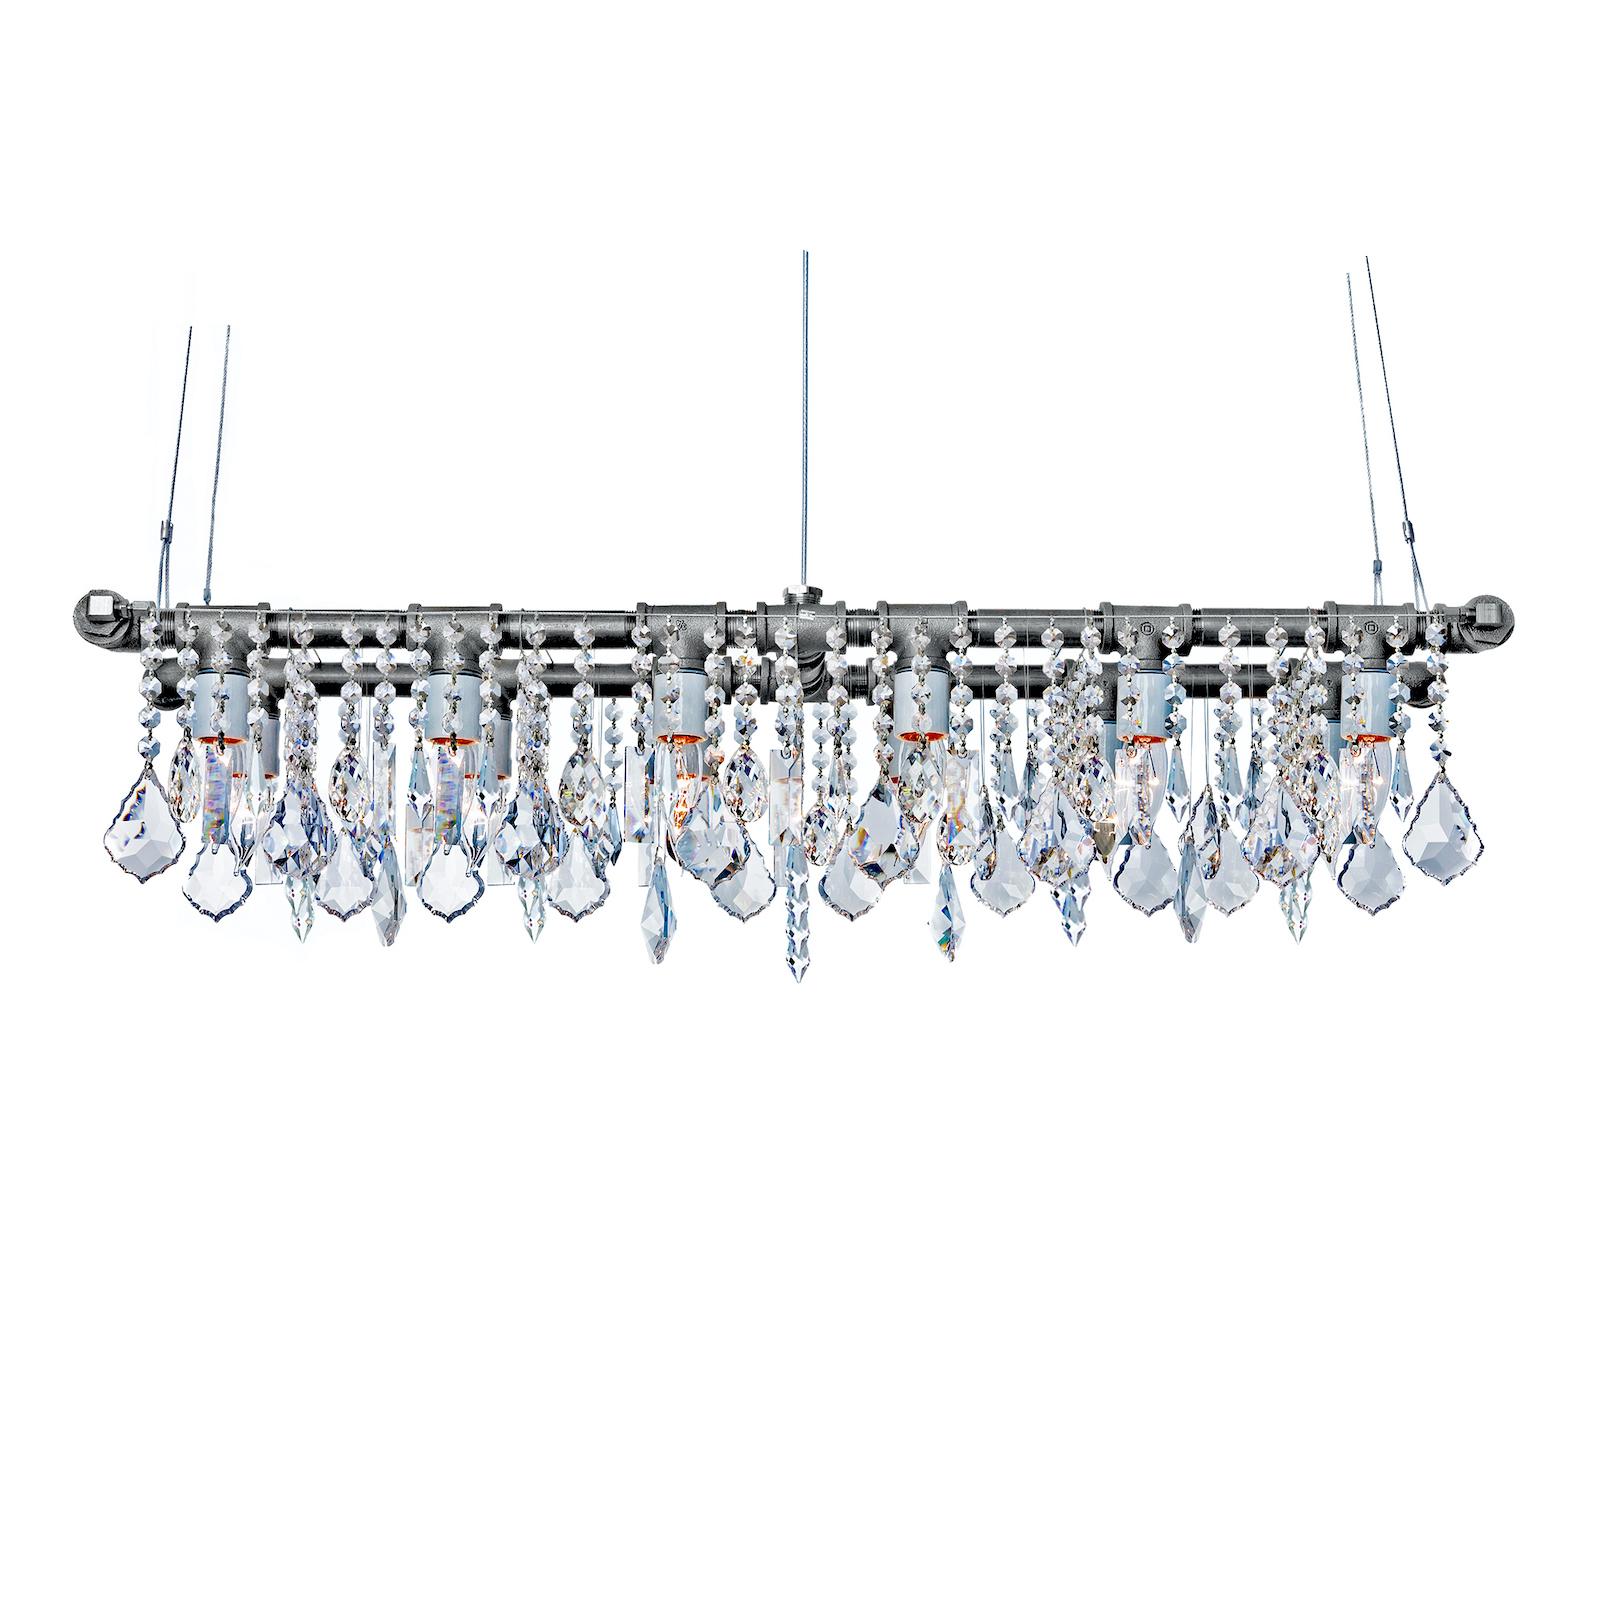 Industrial Banqueting linear suspension chandelier by Michael McHale
Dimensions: D 28 x W 114 x H 25.5 cm.
Materials: steel, optically-pure gem-cut crystal.

12 x medium base CA7 bulb, either incandescent or LED

All our lamps can be wired